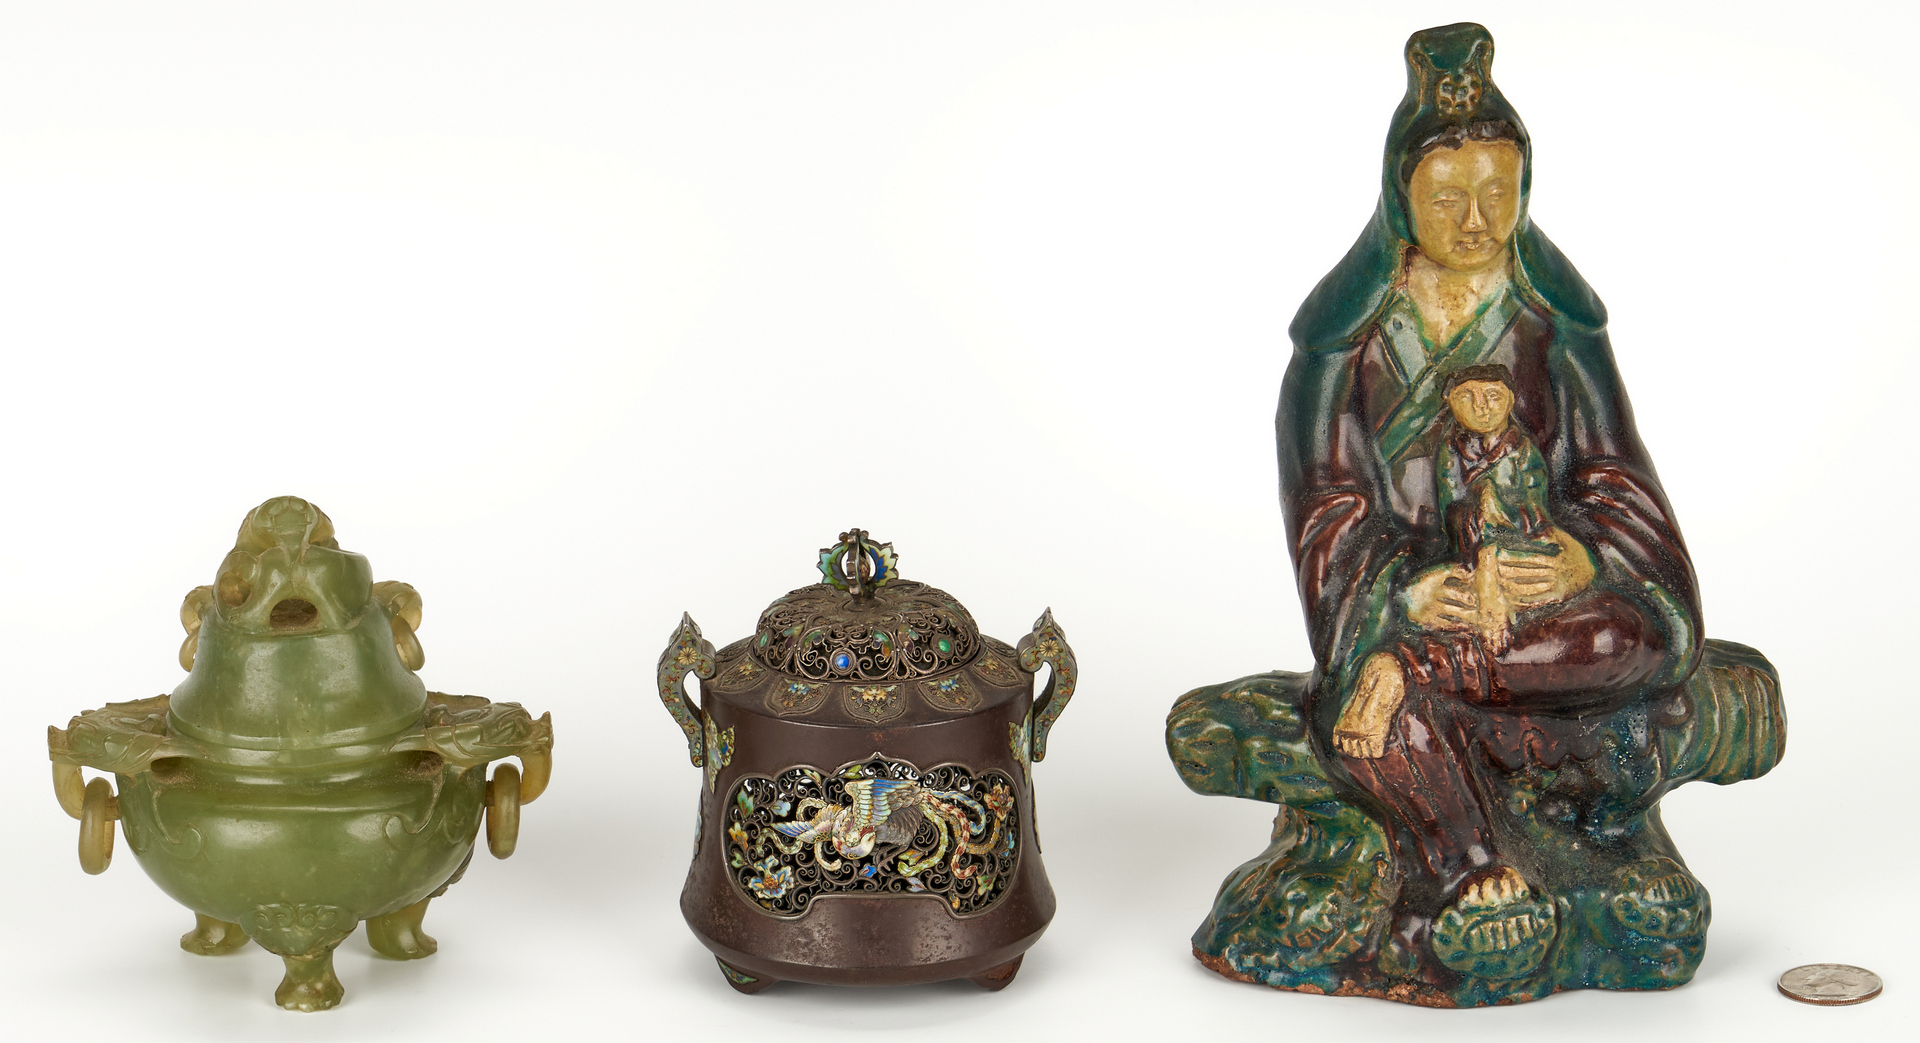 Lot 7: 2 Lidded Censers and Guanyin Figure